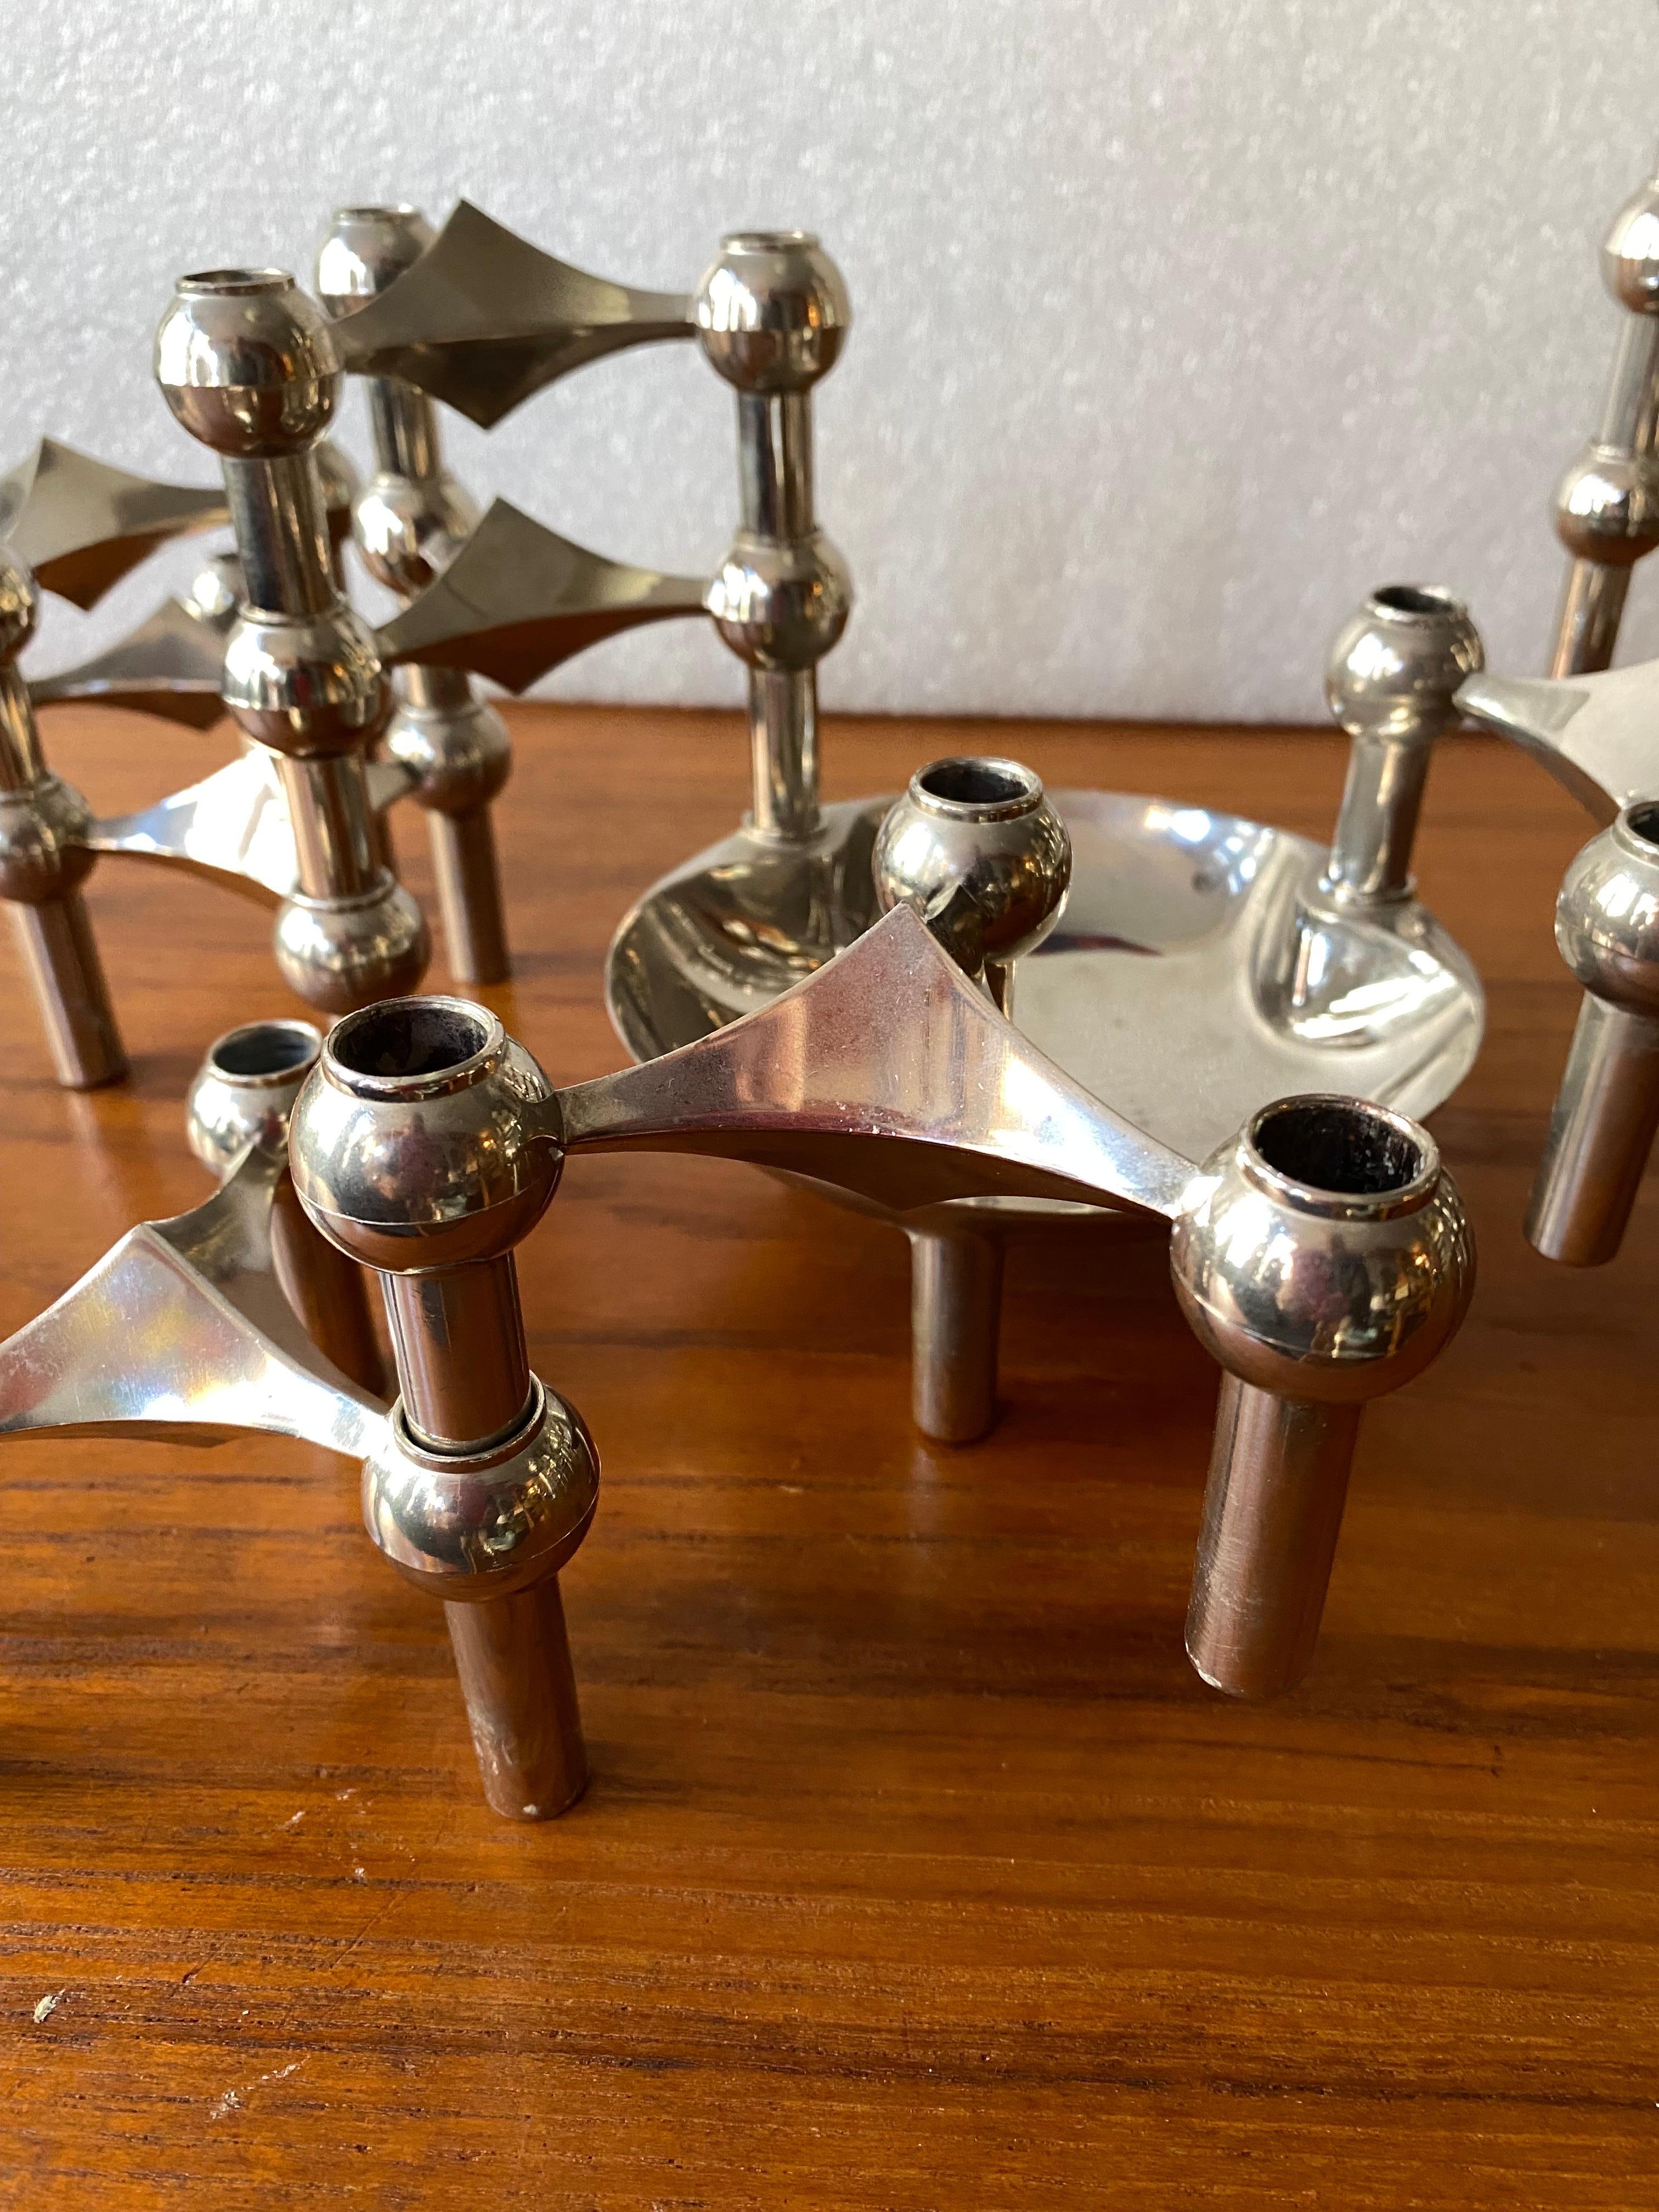 Large Grouping of Nagel and Stoffi Candlsticks with one bowl. 21 pieces in all allows for multiple configurations and designs! Metal with a nickel plated finish. Overall very clean example! The bowl piece shows a little wear in center. As shown in